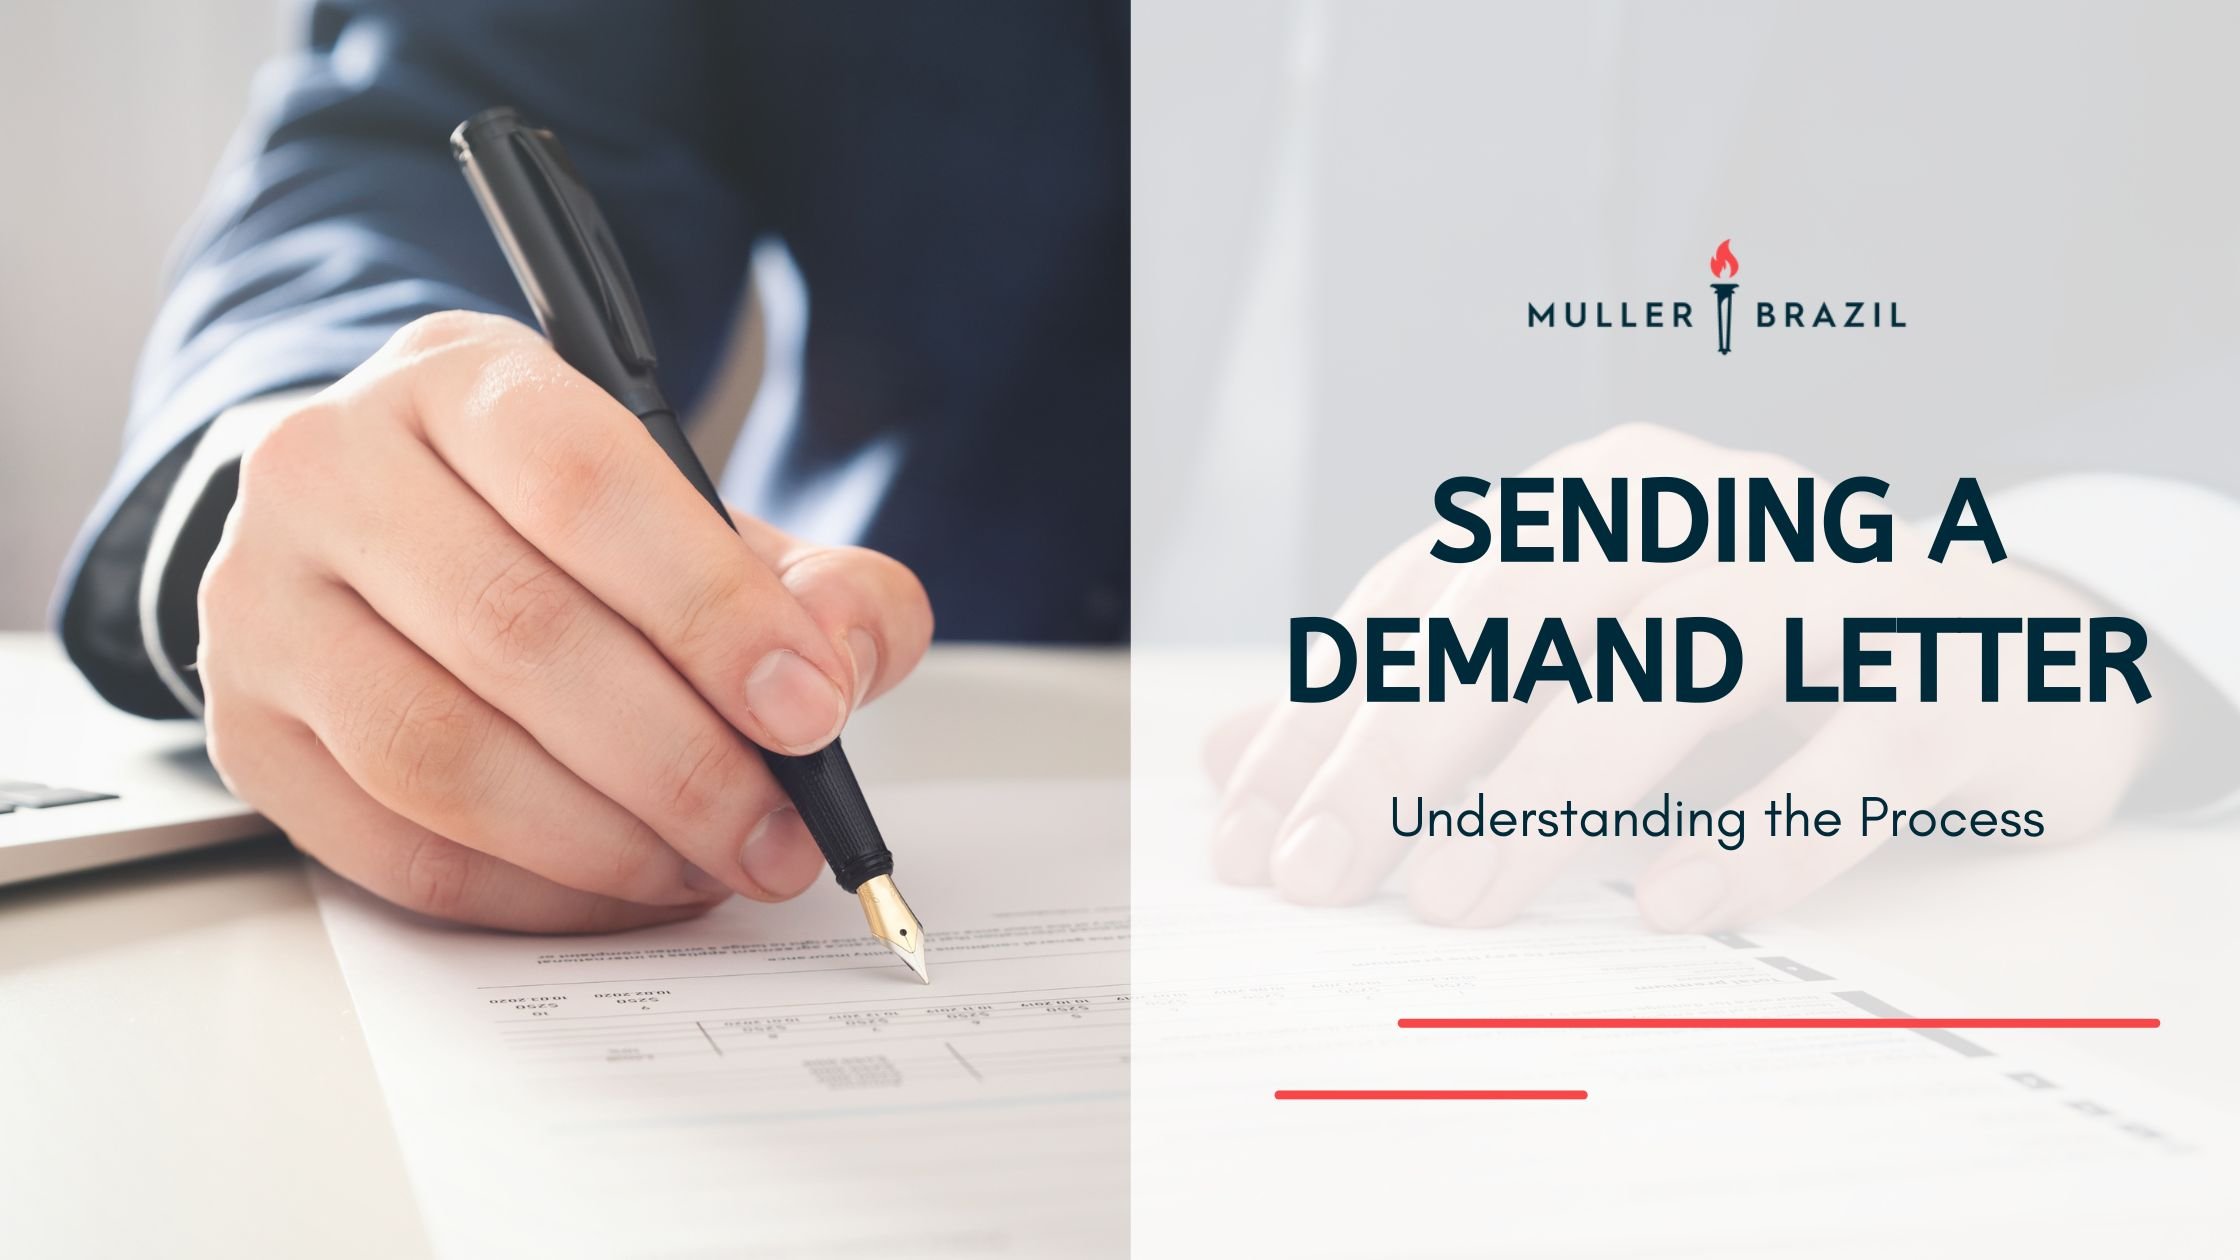 A professional blog post featured image showing a close-up of a person's hand holding a pen, poised to write on a document. The image is overlaid with text that reads 'SENDING A DEMAND LETTER - Understanding the Process' and includes the logo of 'Muller Brazil', suggesting a legal context related to the steps taken after a lawyer sends a demand letter.